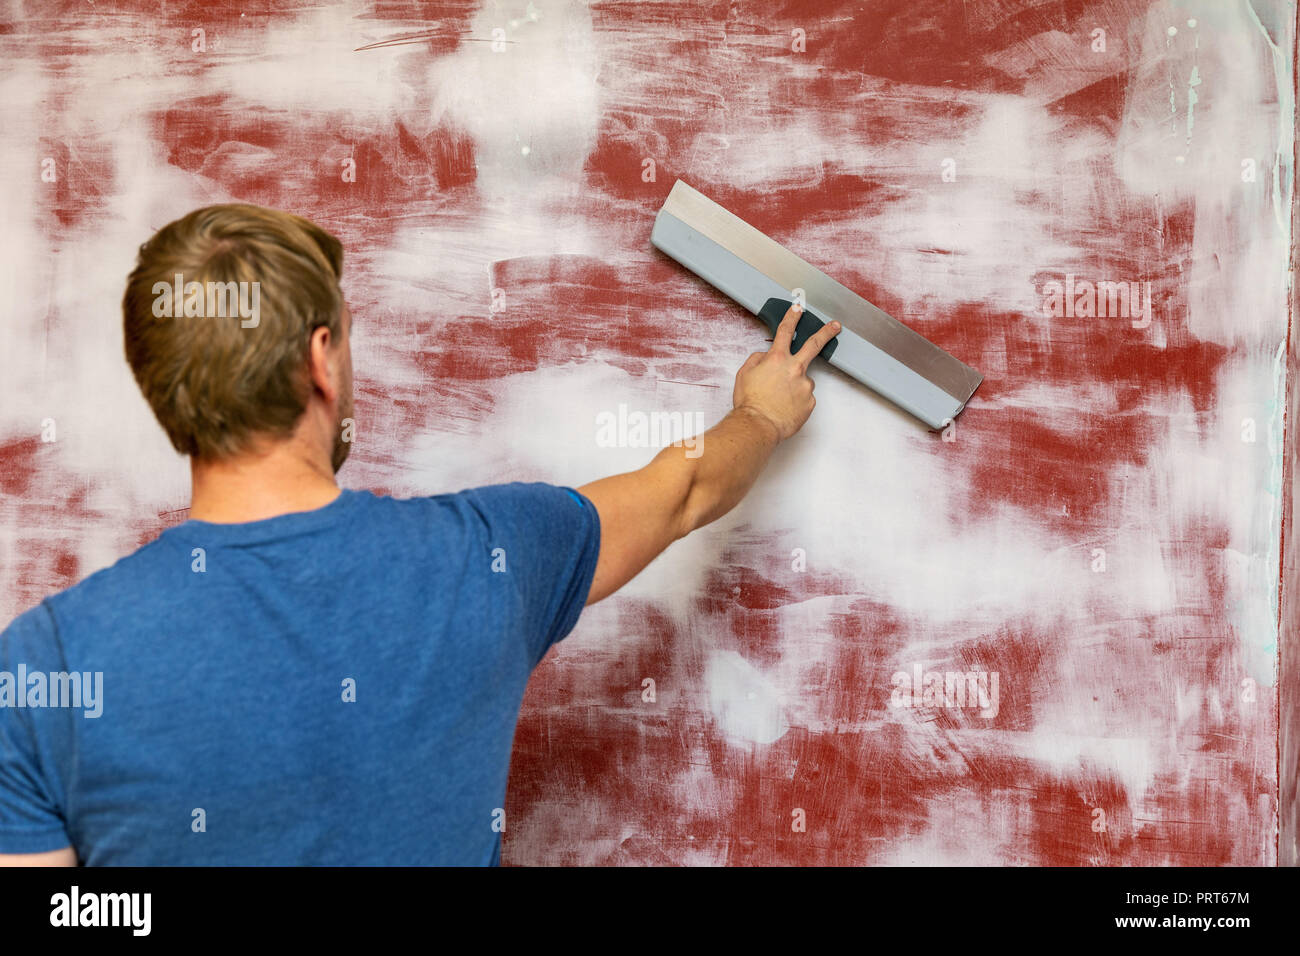 man plastering wall with taping knife Stock Photo